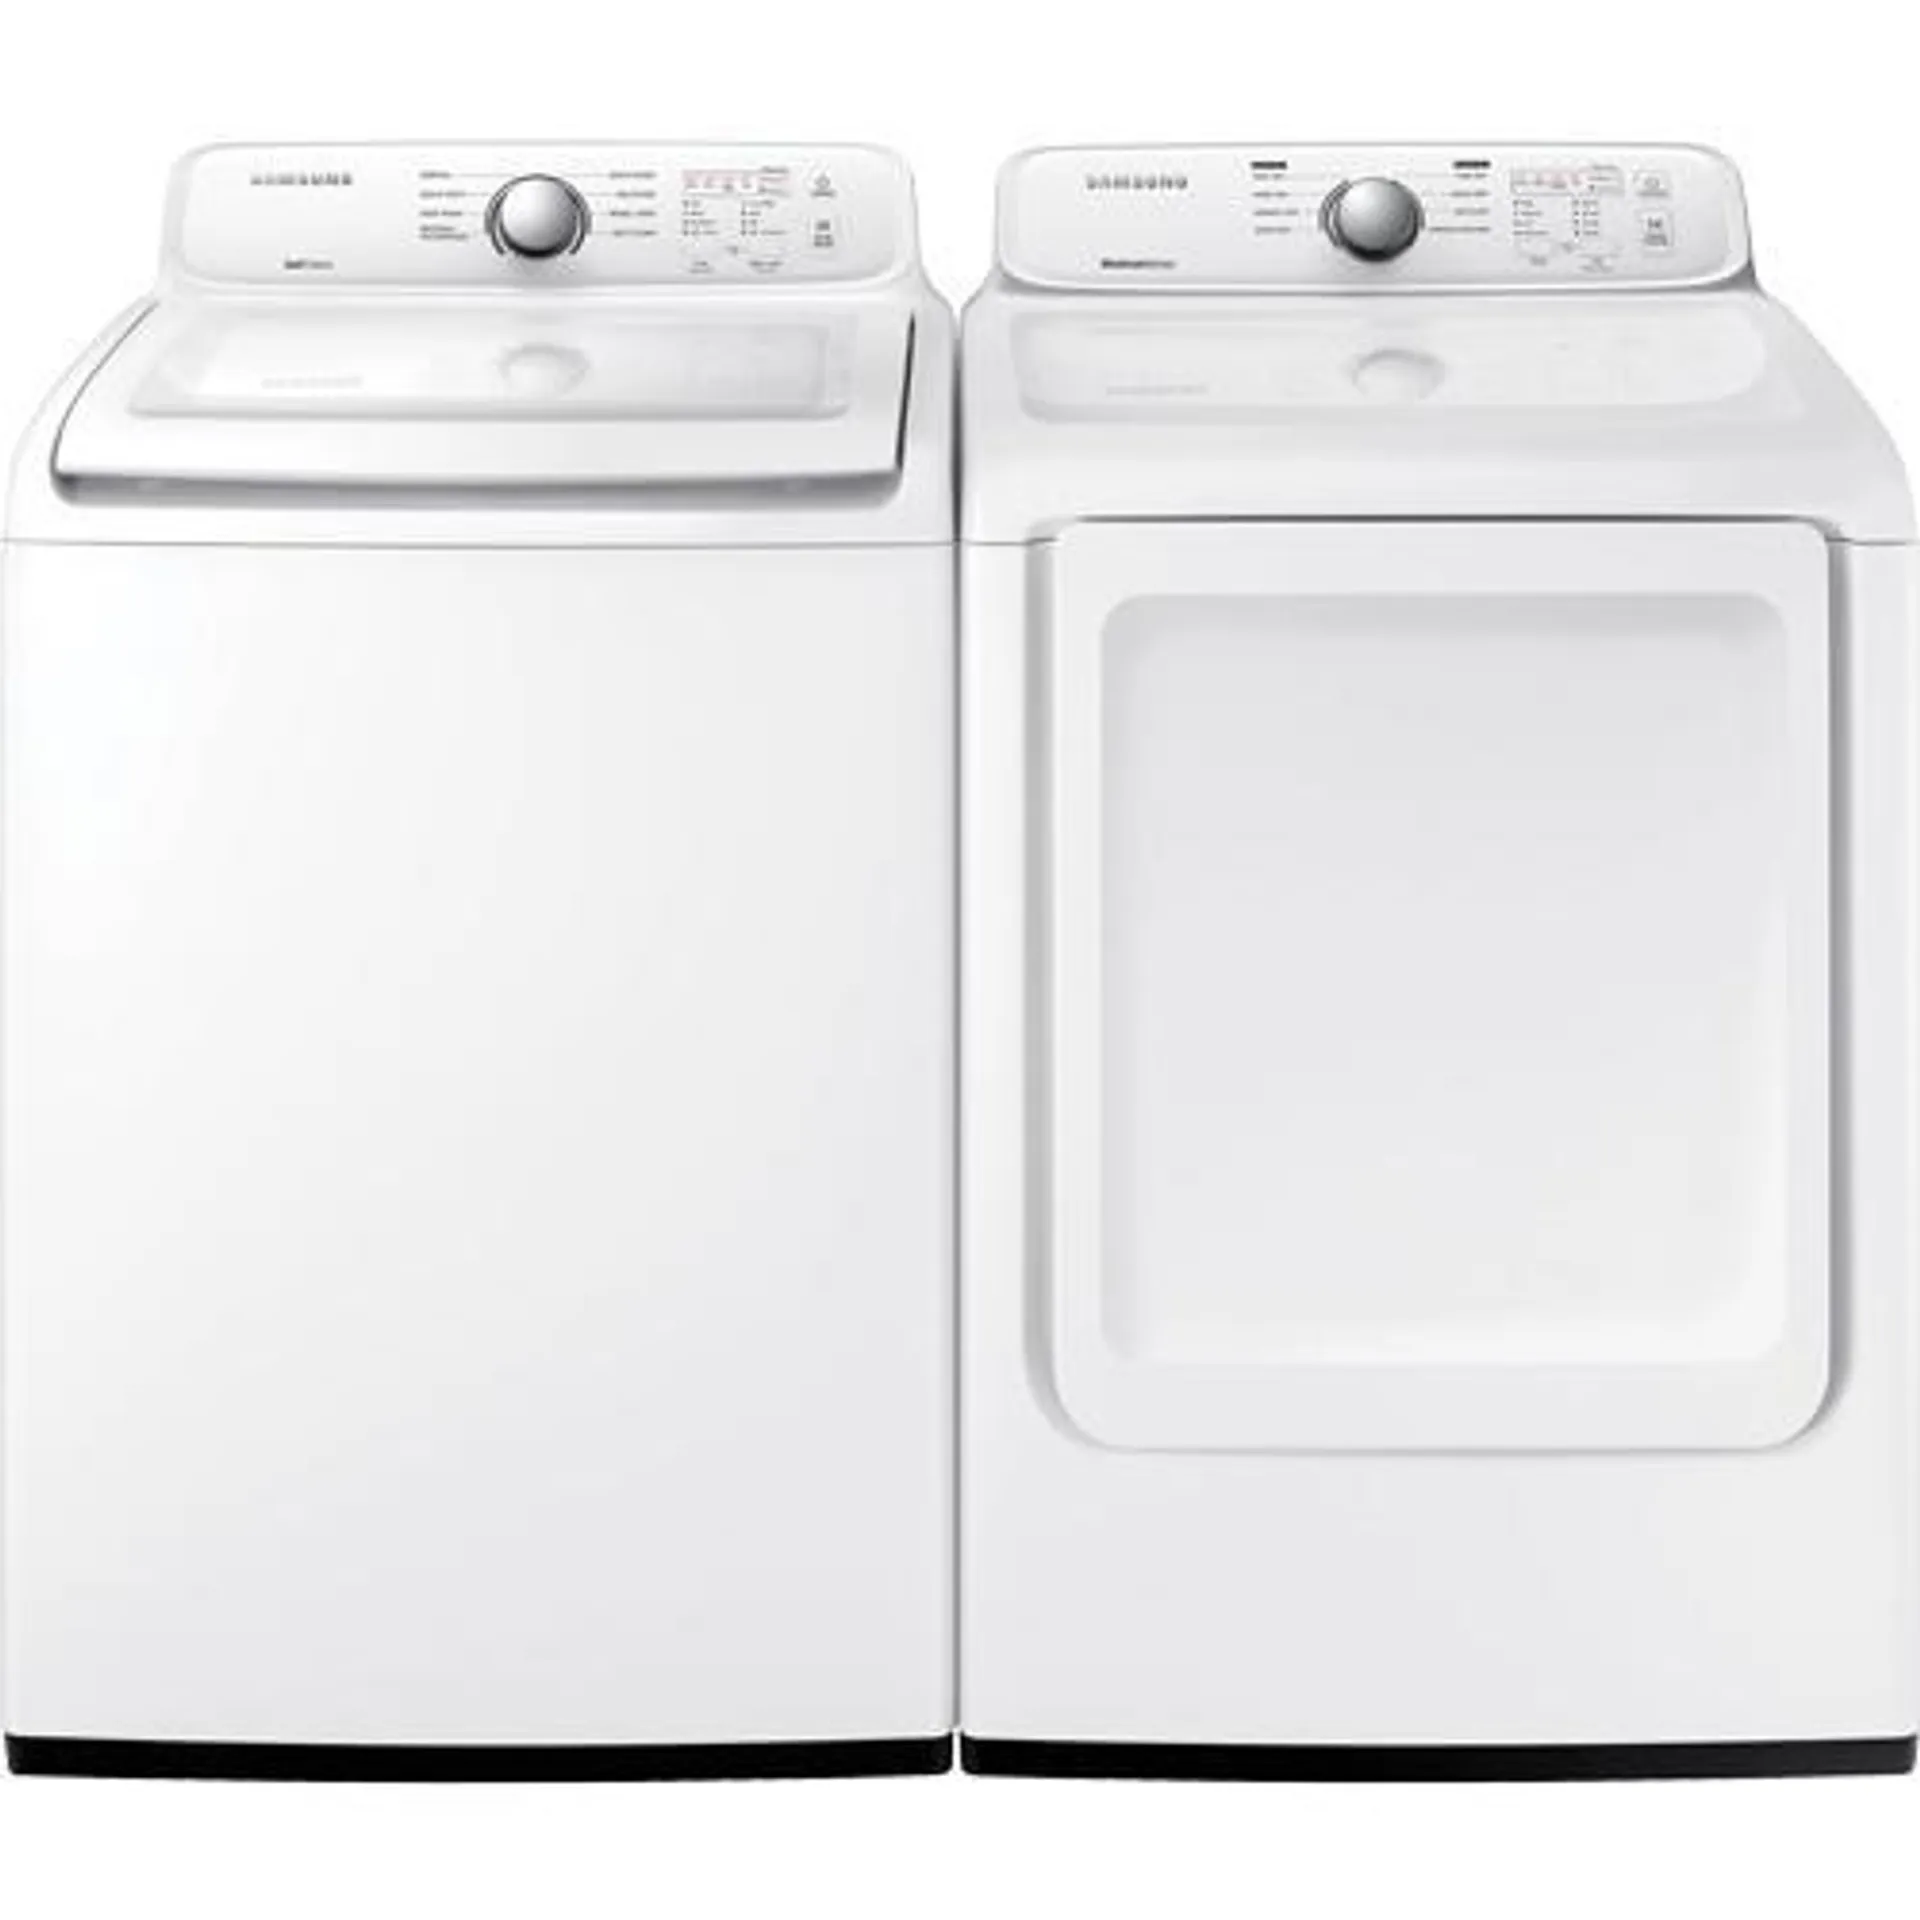 4.5 CuFt Top Load Washer With 7.2 CuFt Front Load Electric Dryer In White